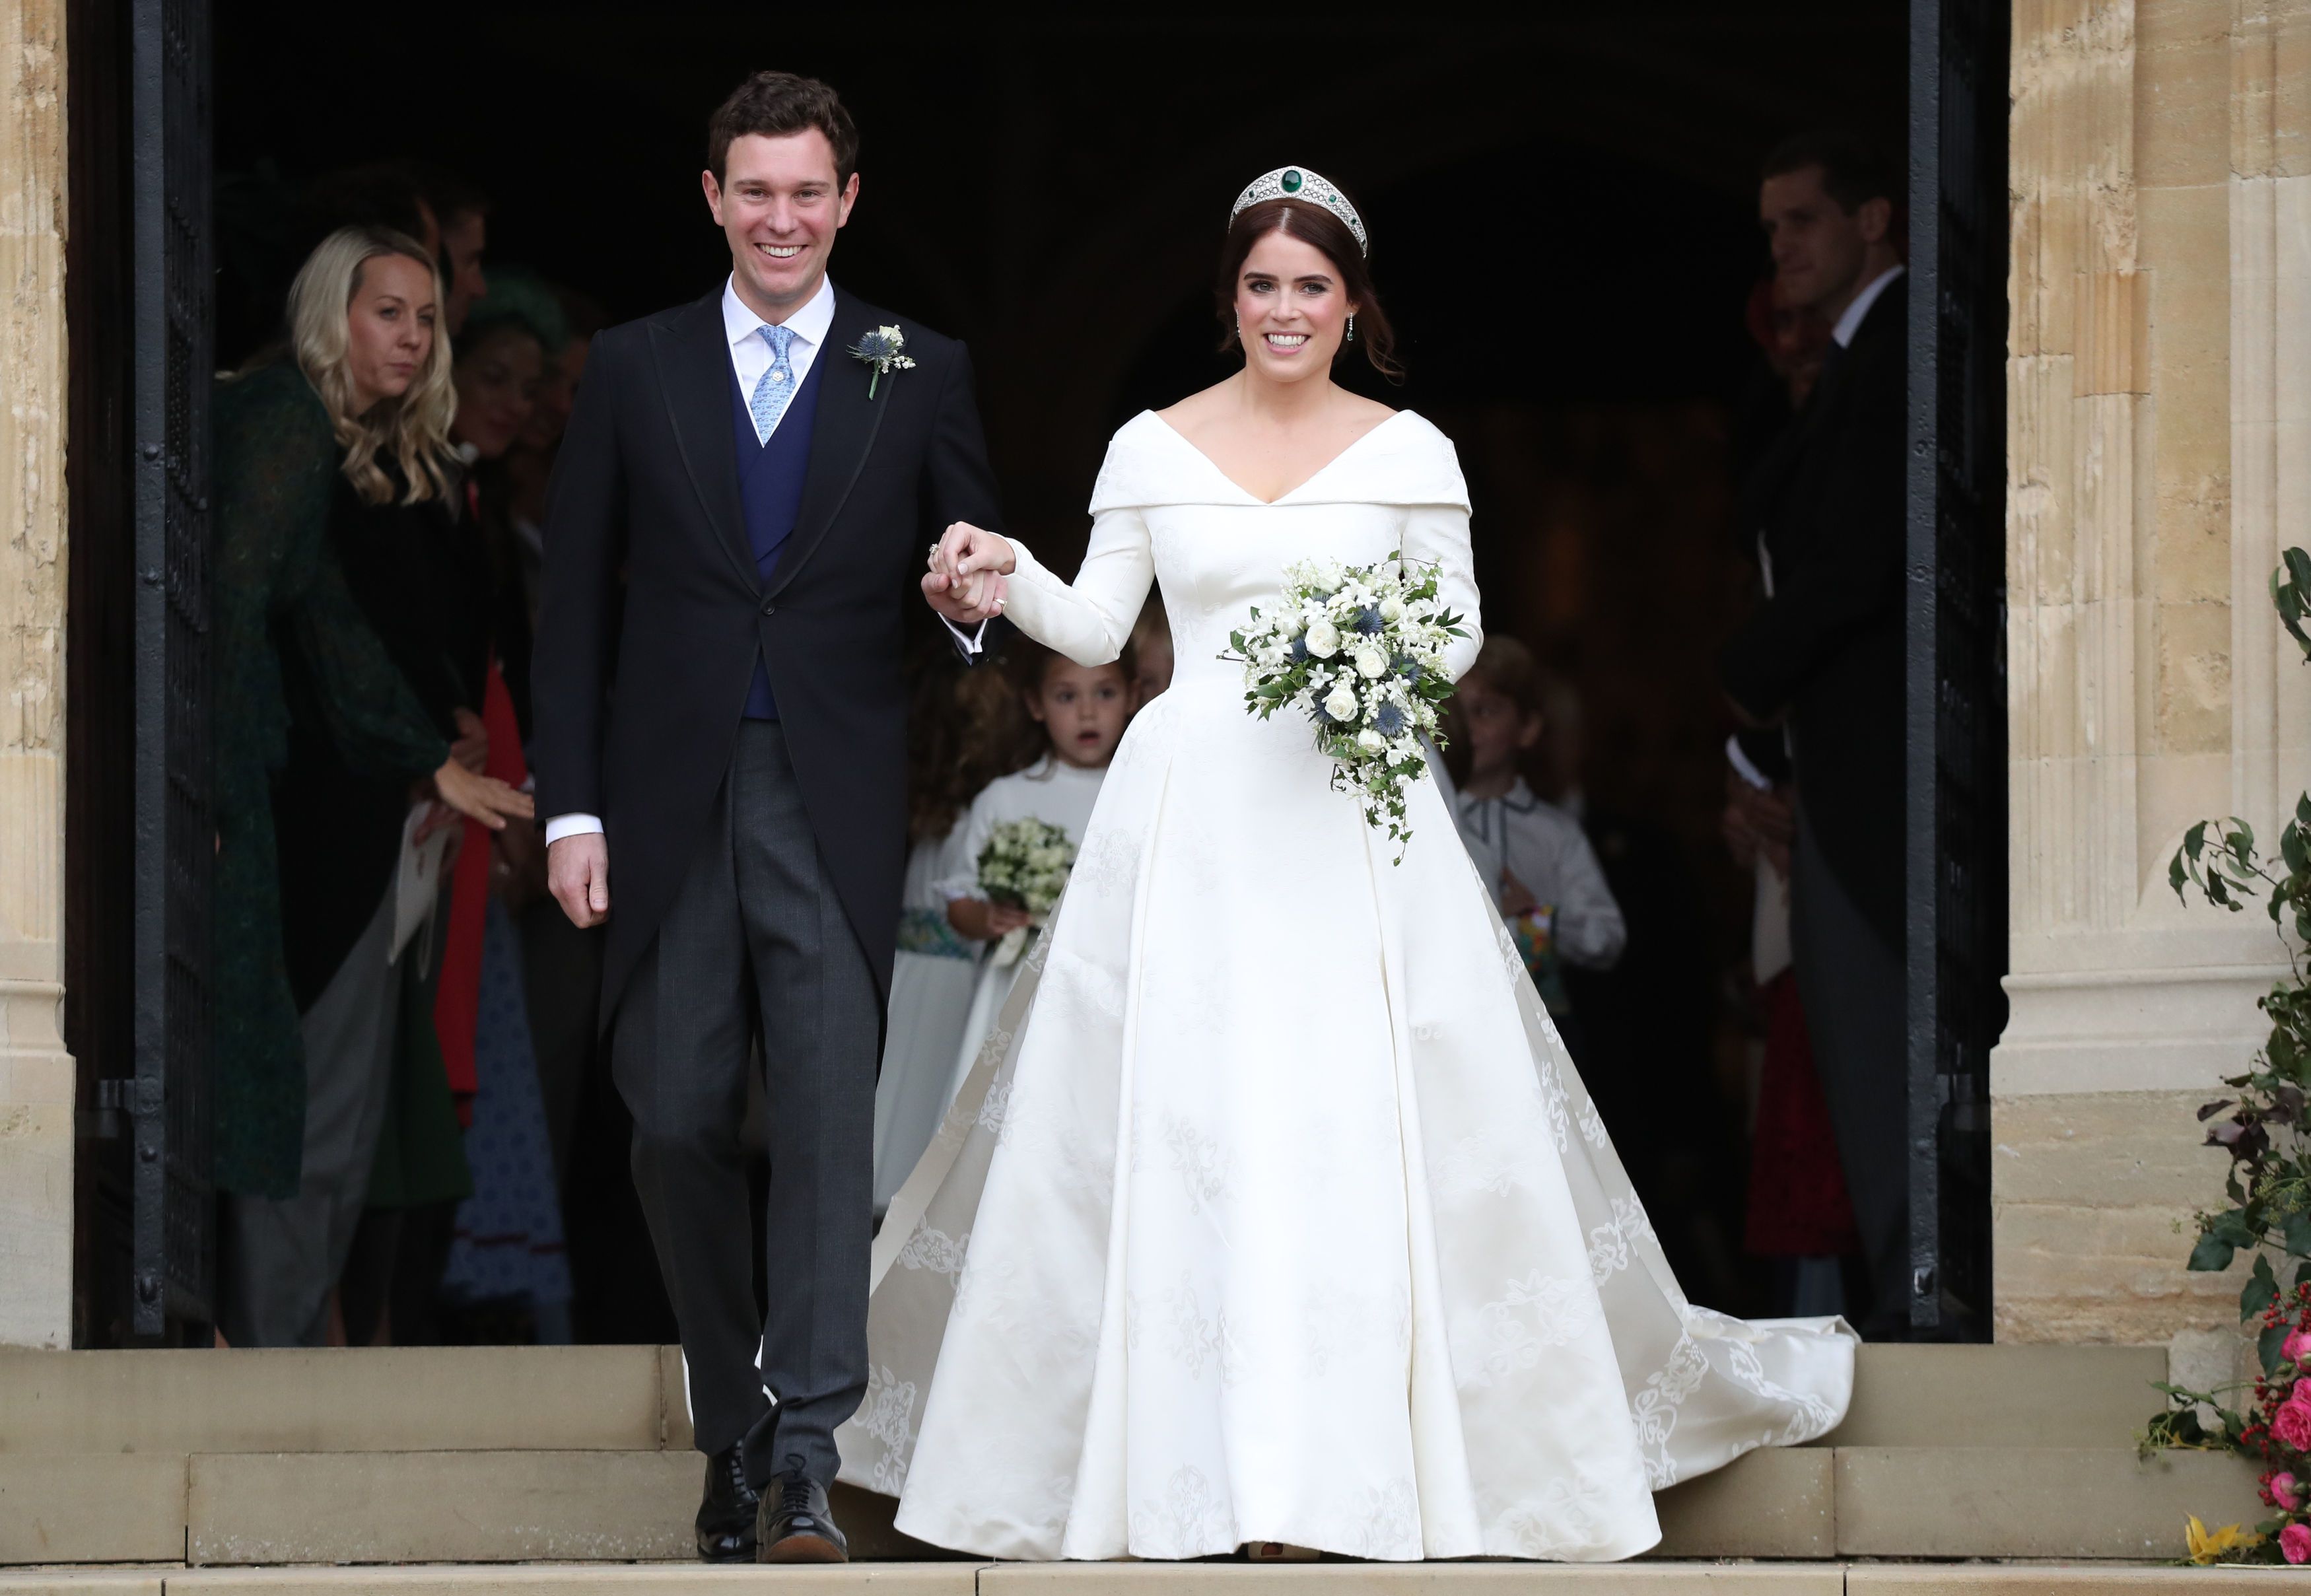 Princess Eugenie of York and her husband Jack Brooksbank on the steps of St George's Chapel after their wedding on October 12, 2018 in Windsor, England. | Photo: Getty Images